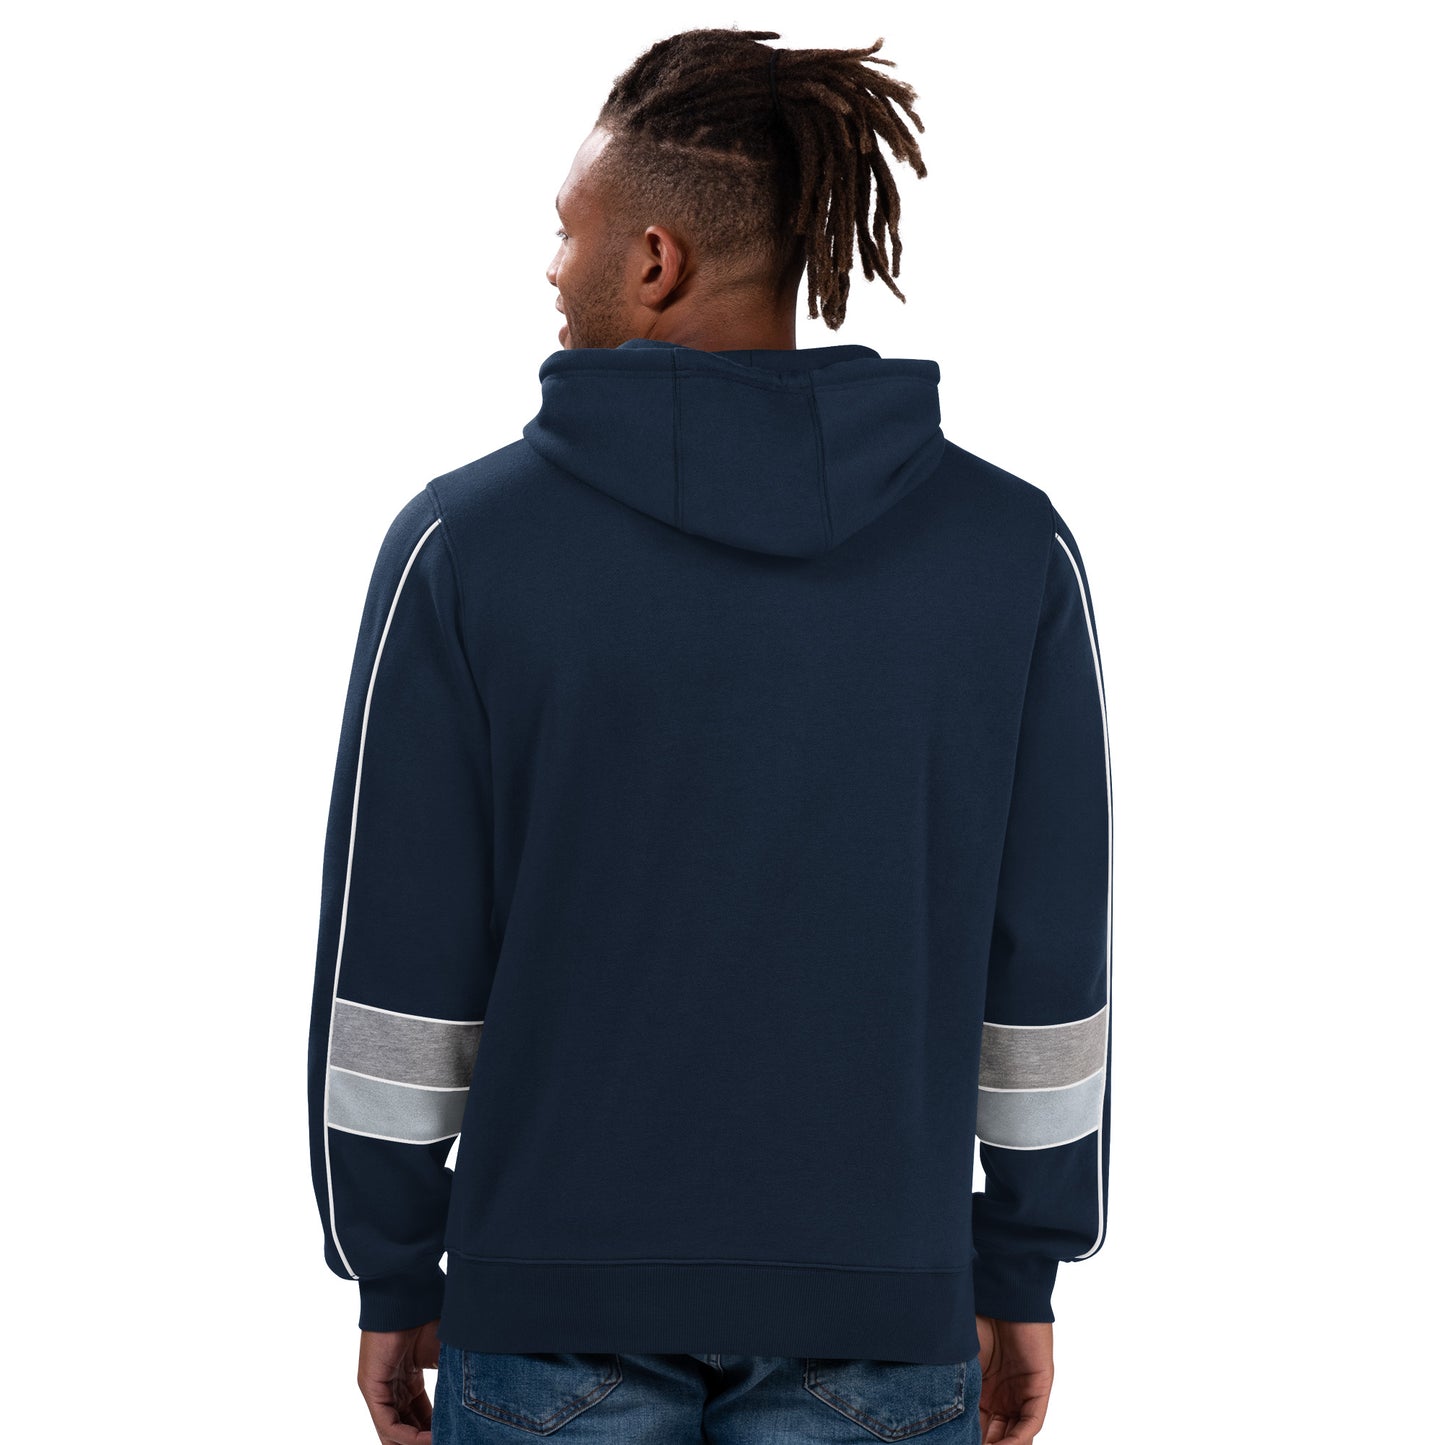 Dallas Cowboys Starter Captain Pull Over Hoodie